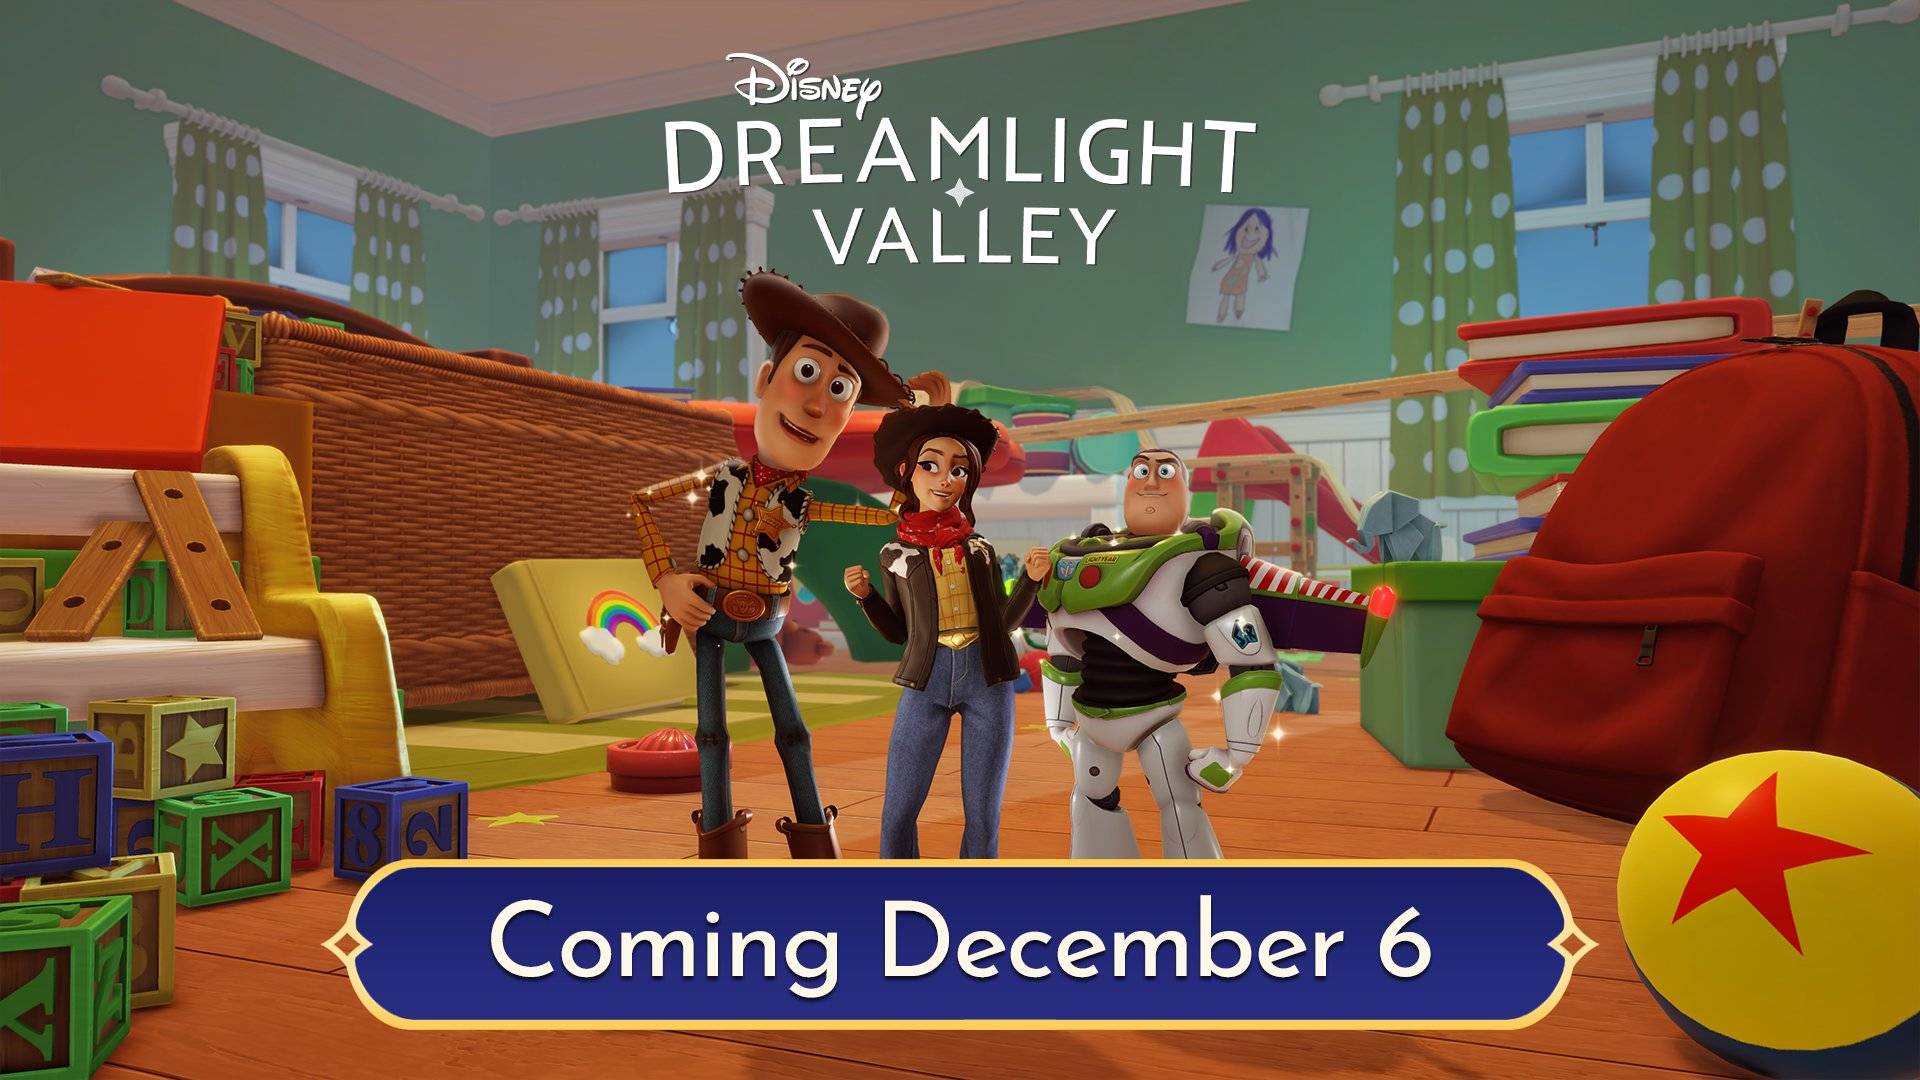 Disney Dreamlight Valley Toy Story Realm Release Date, Characters and More